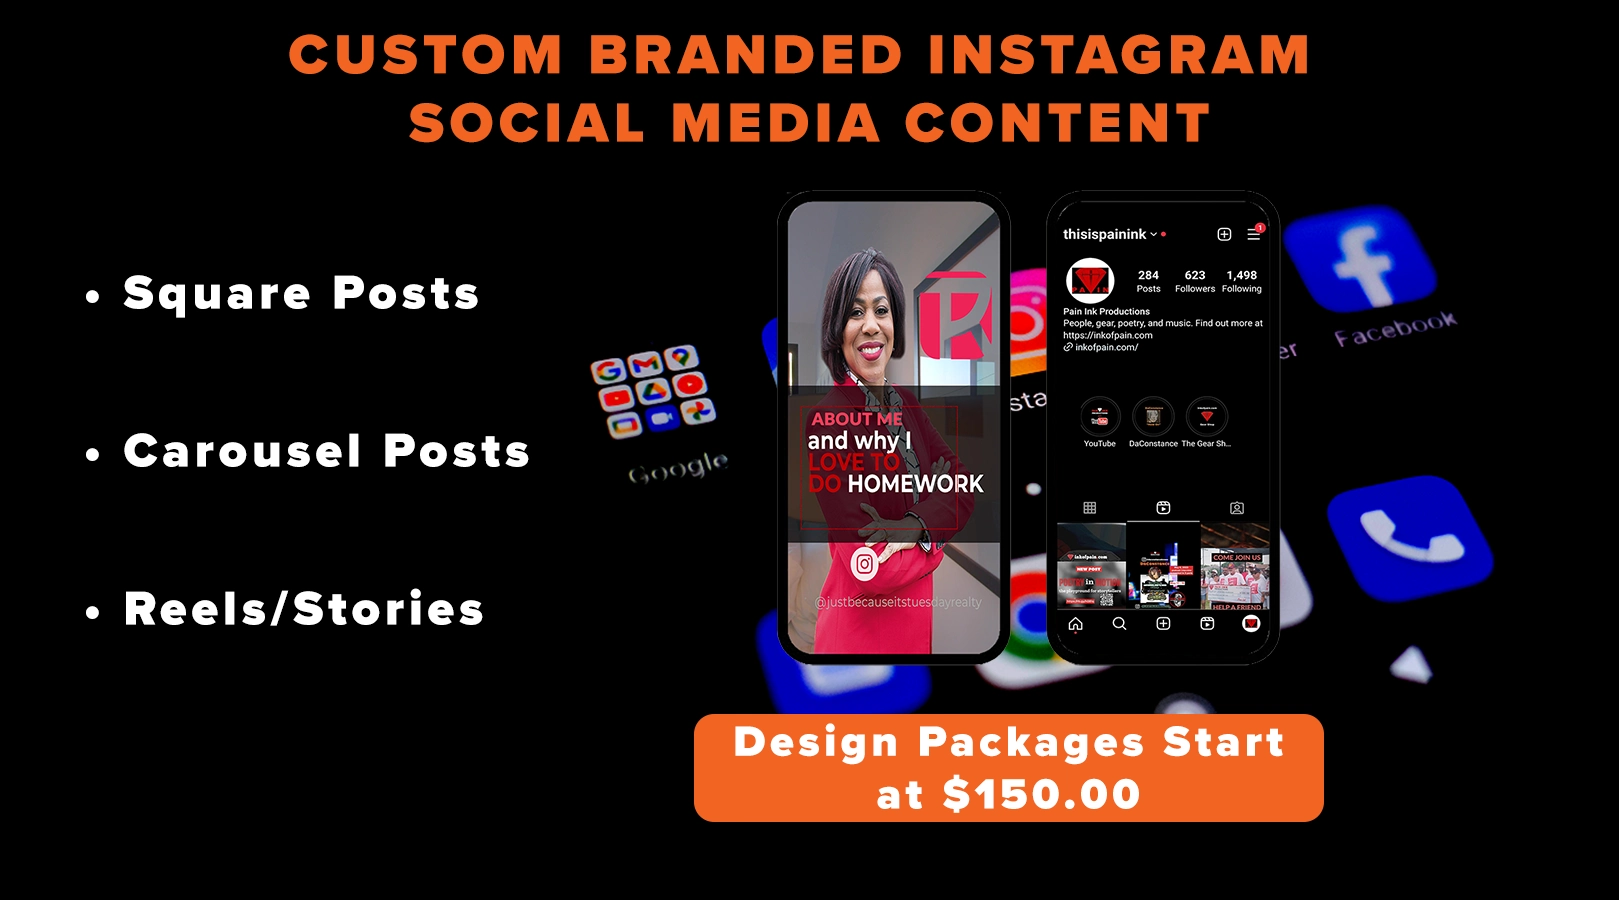 popup for Instagram design packages starting at $150